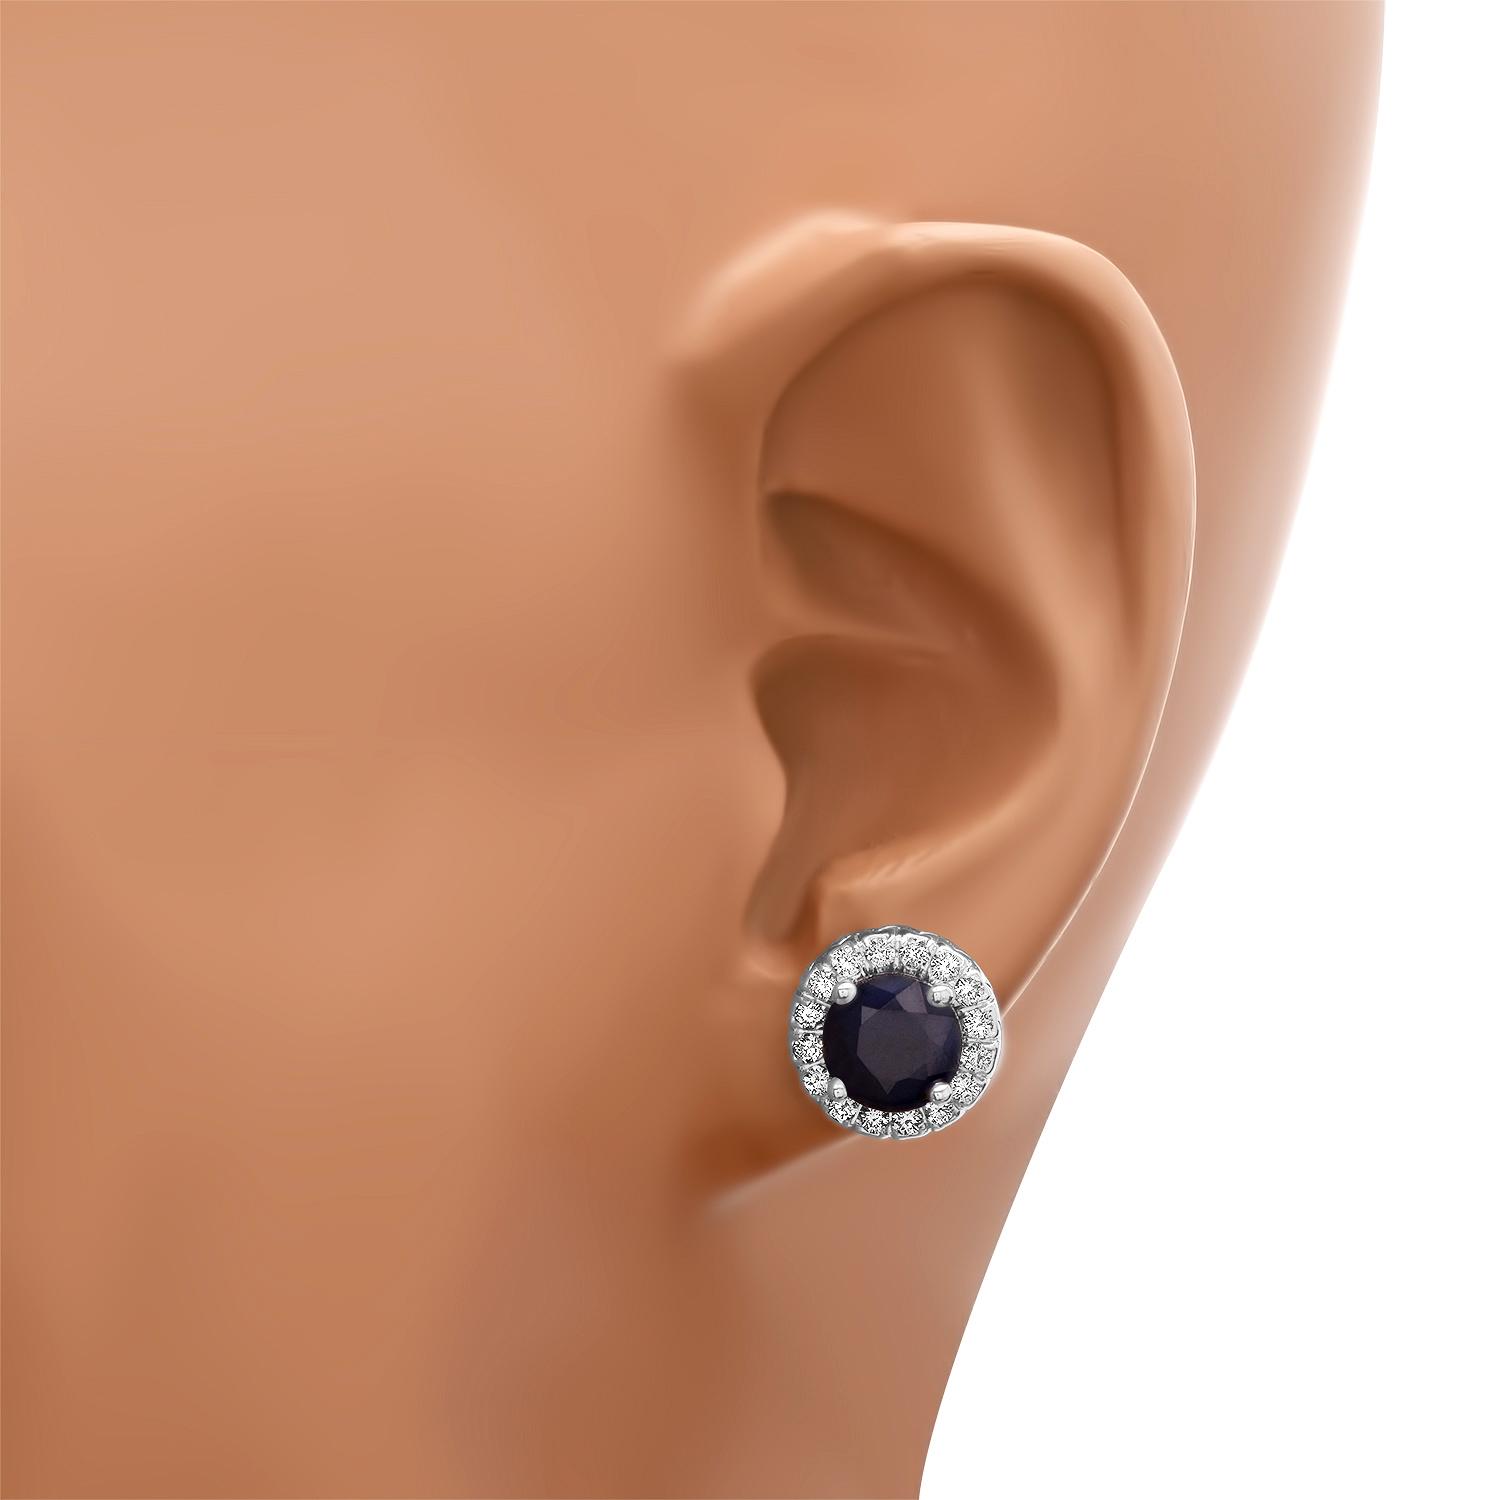 18K White Gold Settings with 4.09ct Sapphire and 0.60ct Diamond Earrings